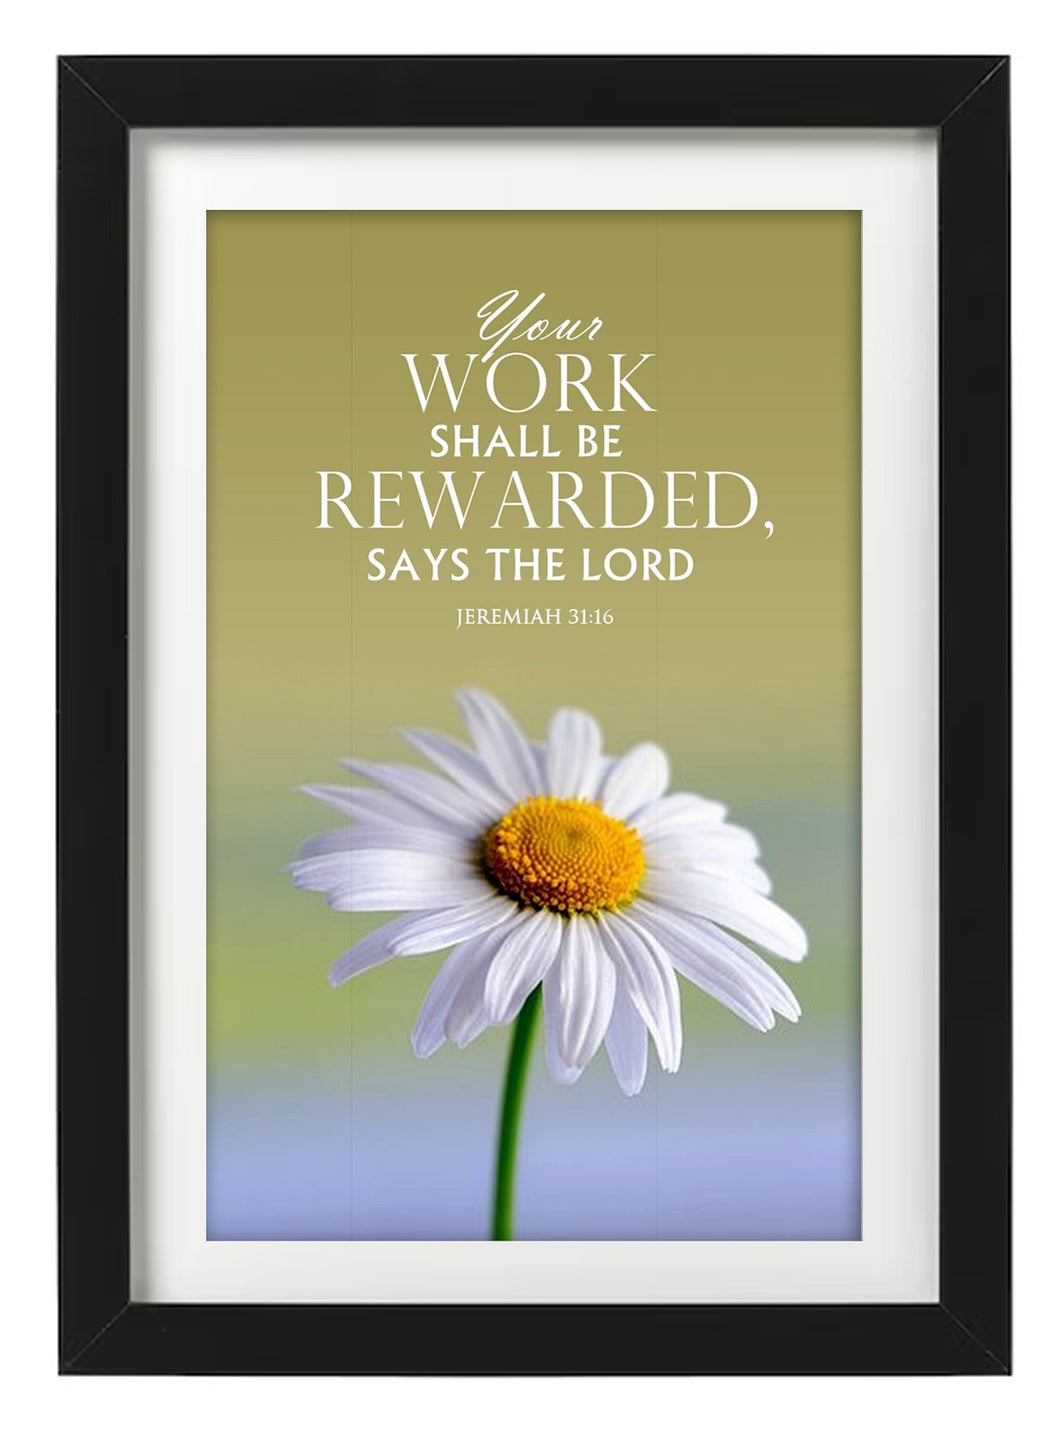 Your work shall be rewarded